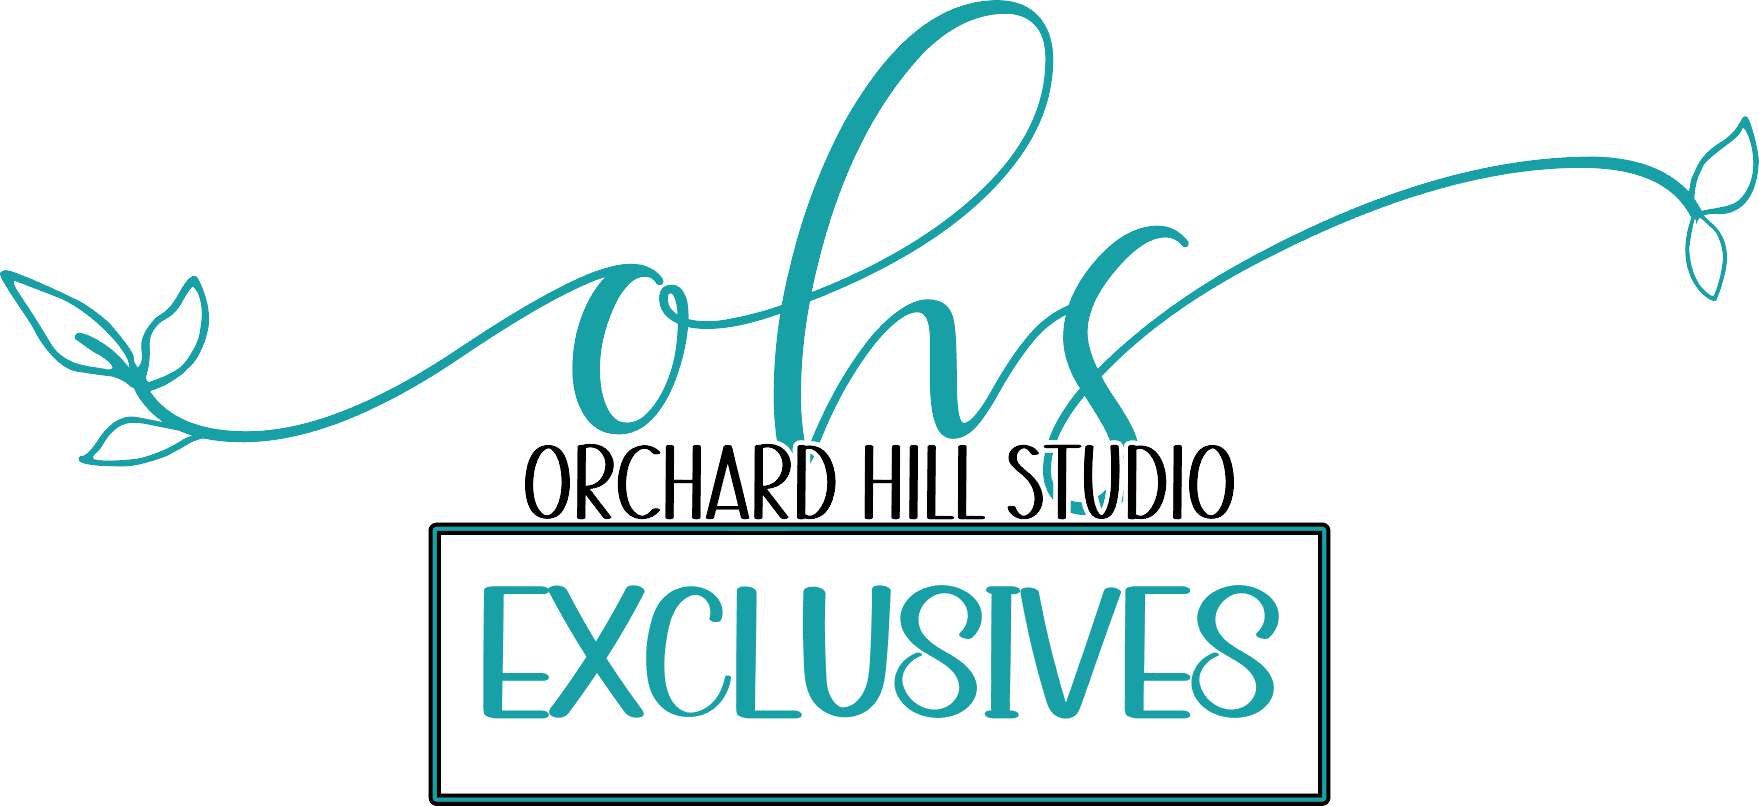 Orchard Hill Exclusives VIP Group